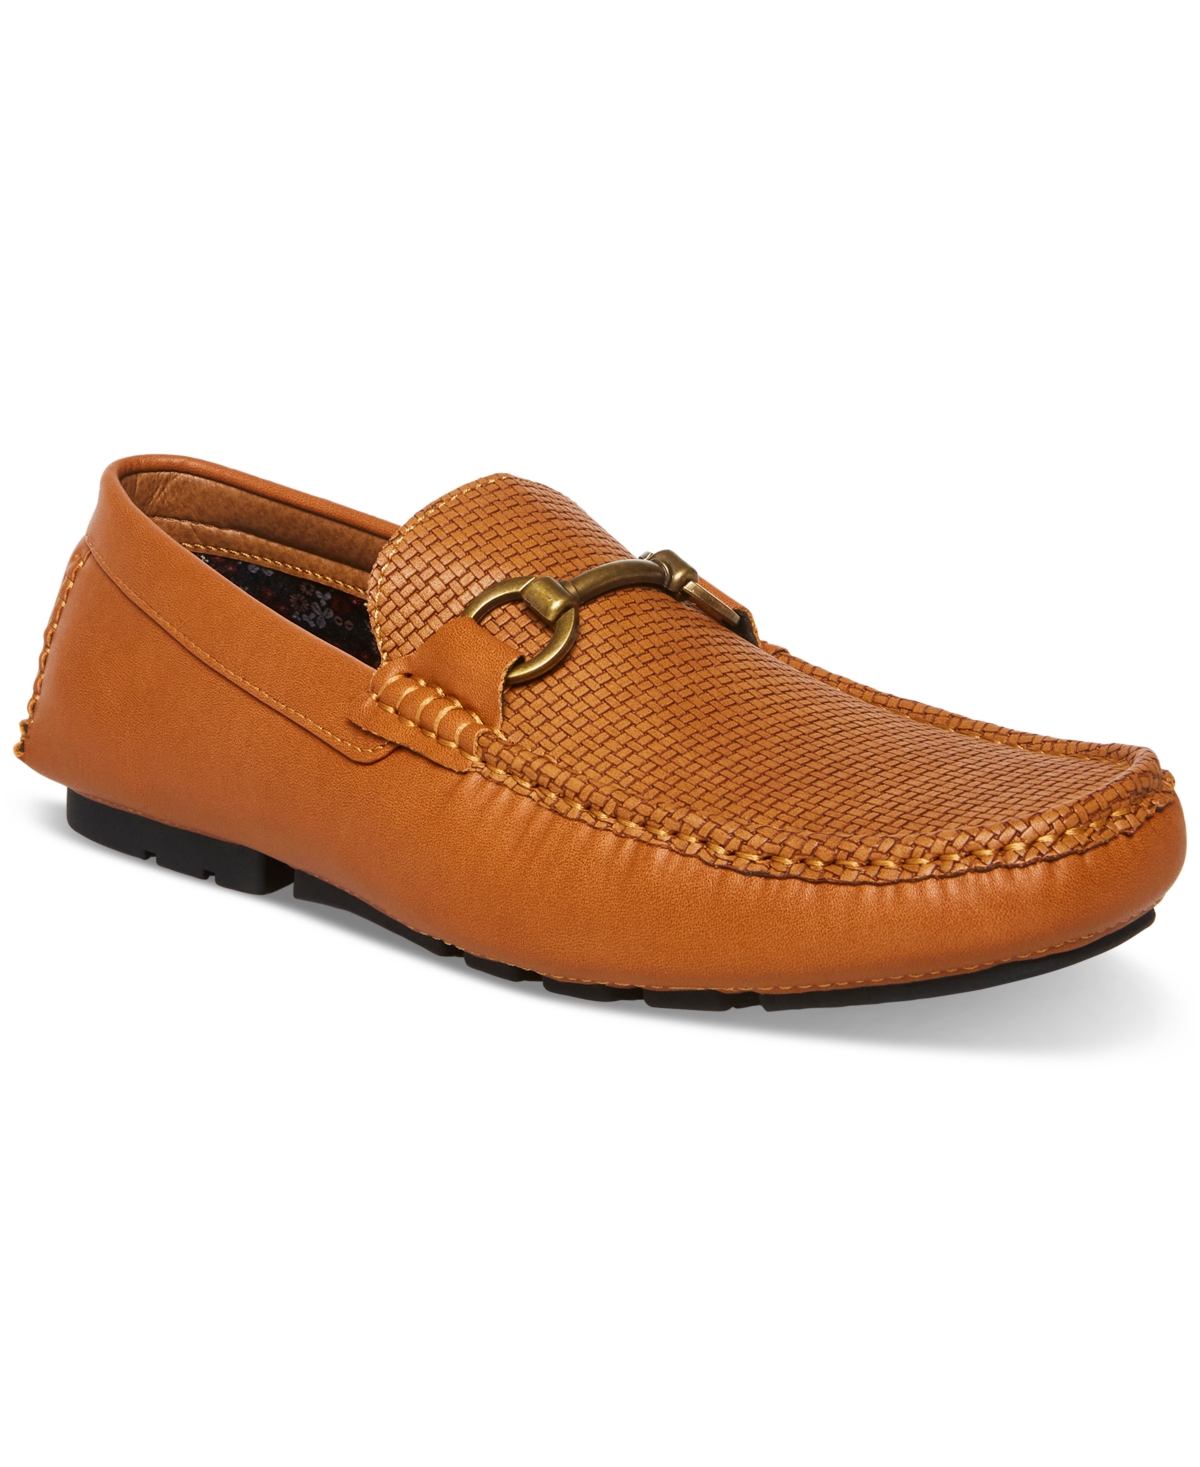 Madden Men's M-Dashin Croc-Embossed Faux-Leather Loafers - Tan